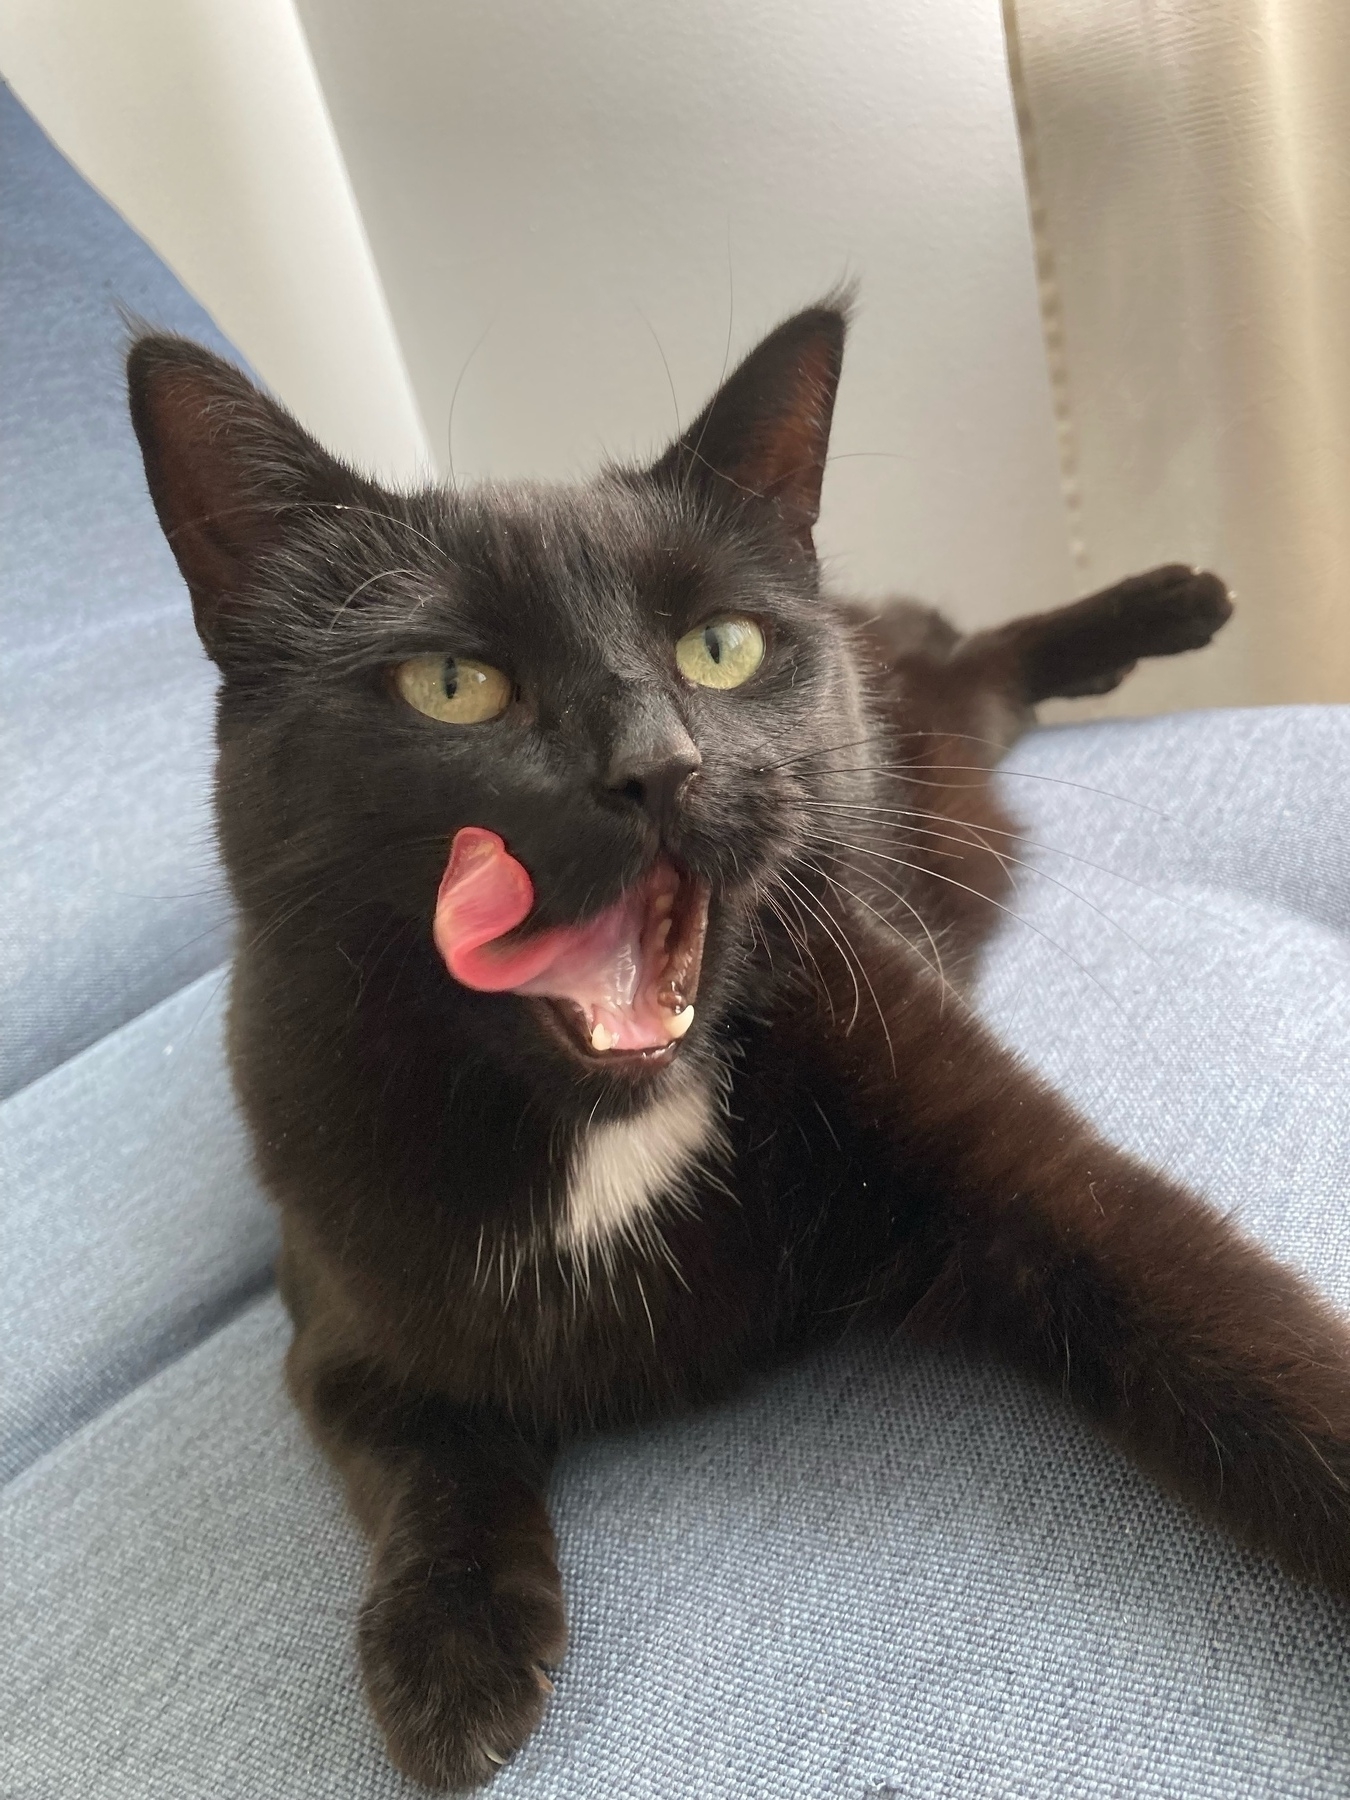 Kolka, a black cat with a white spot on her chest, licking her chops